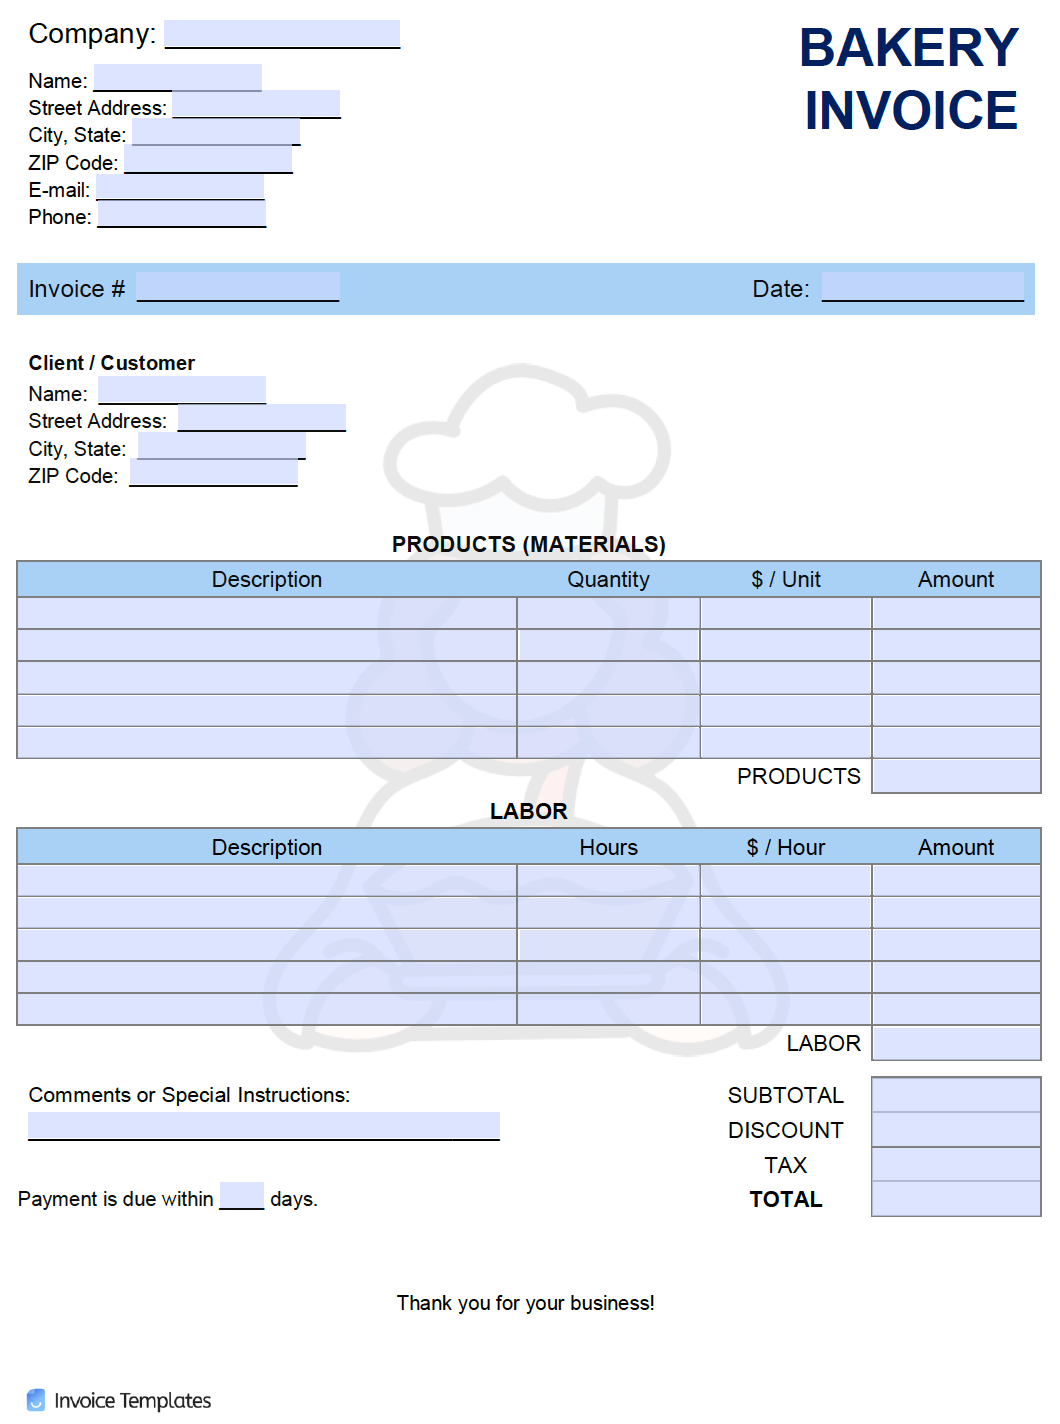 Free Bakery Invoice Template | Pdf | Word | Excel for Bakery Invoice Template